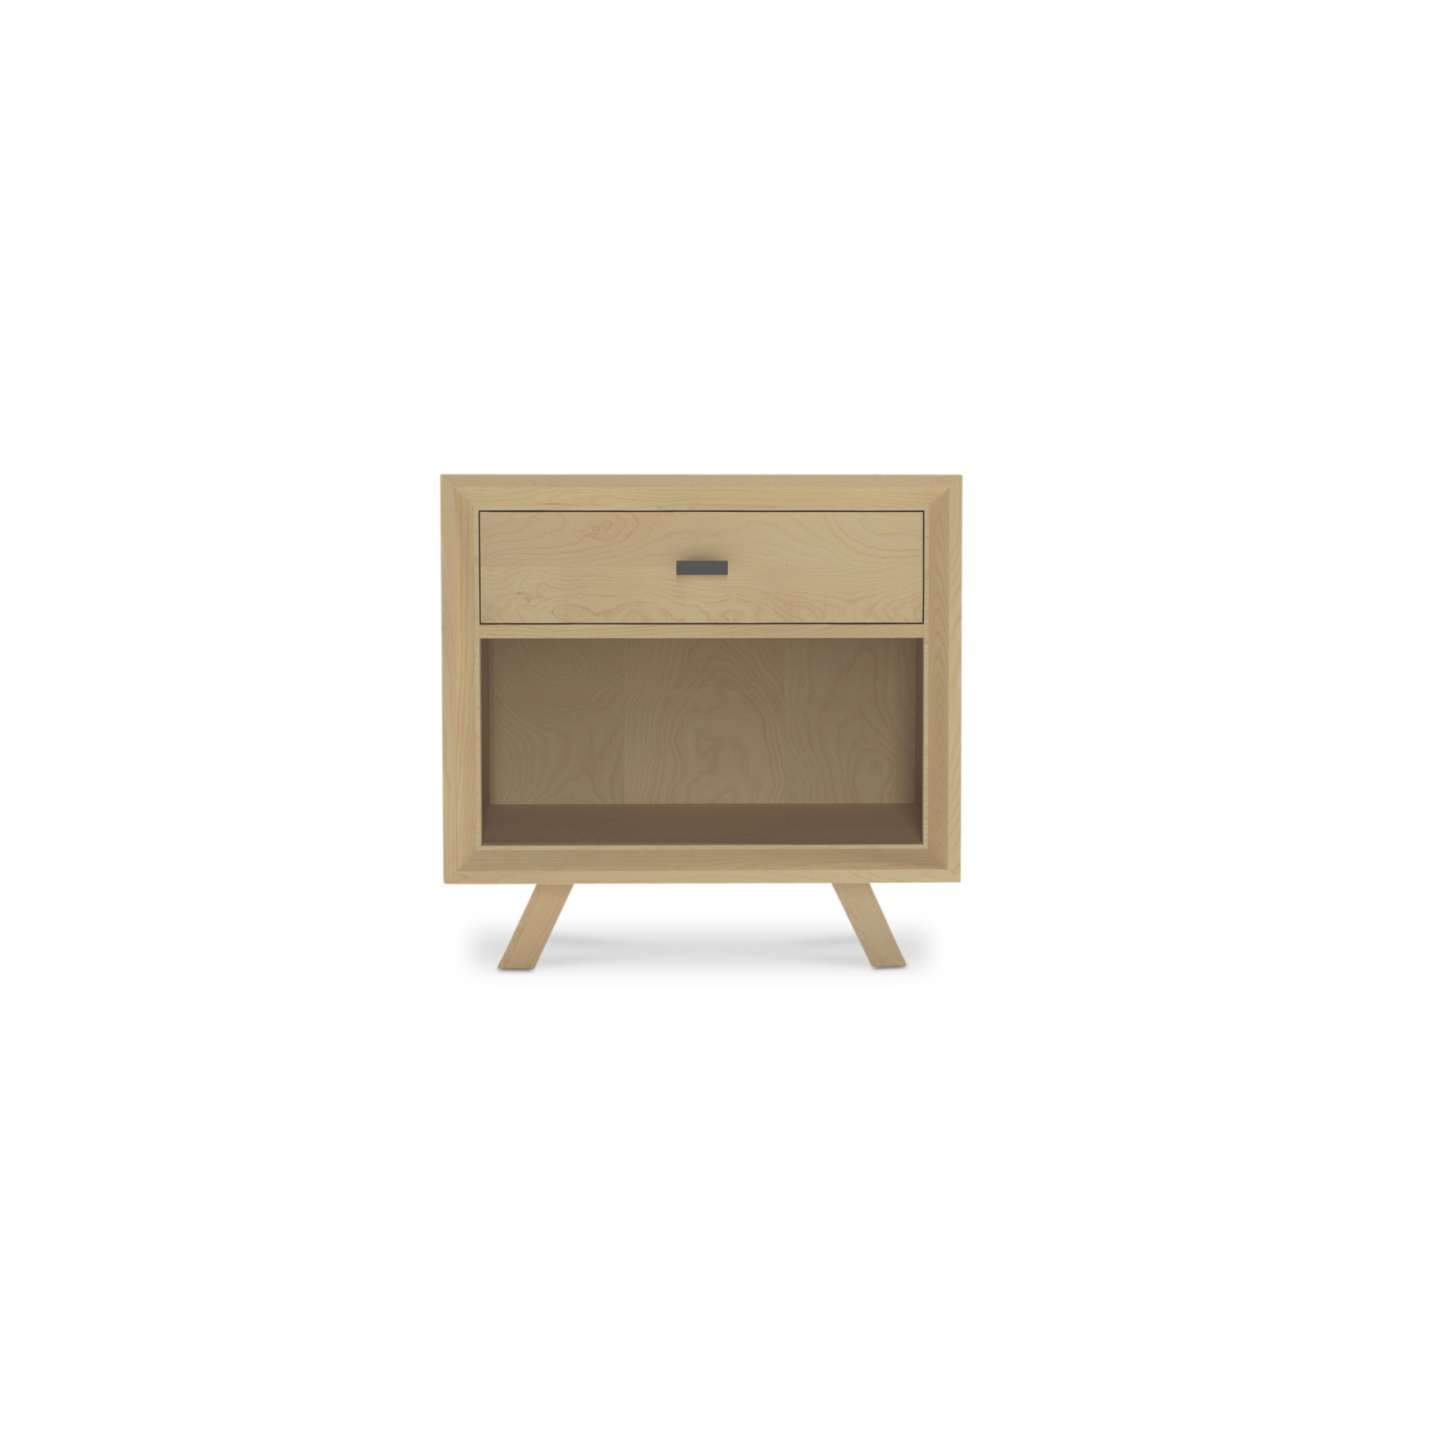 Solid ash wood Scandinavian nightstand with one drawer